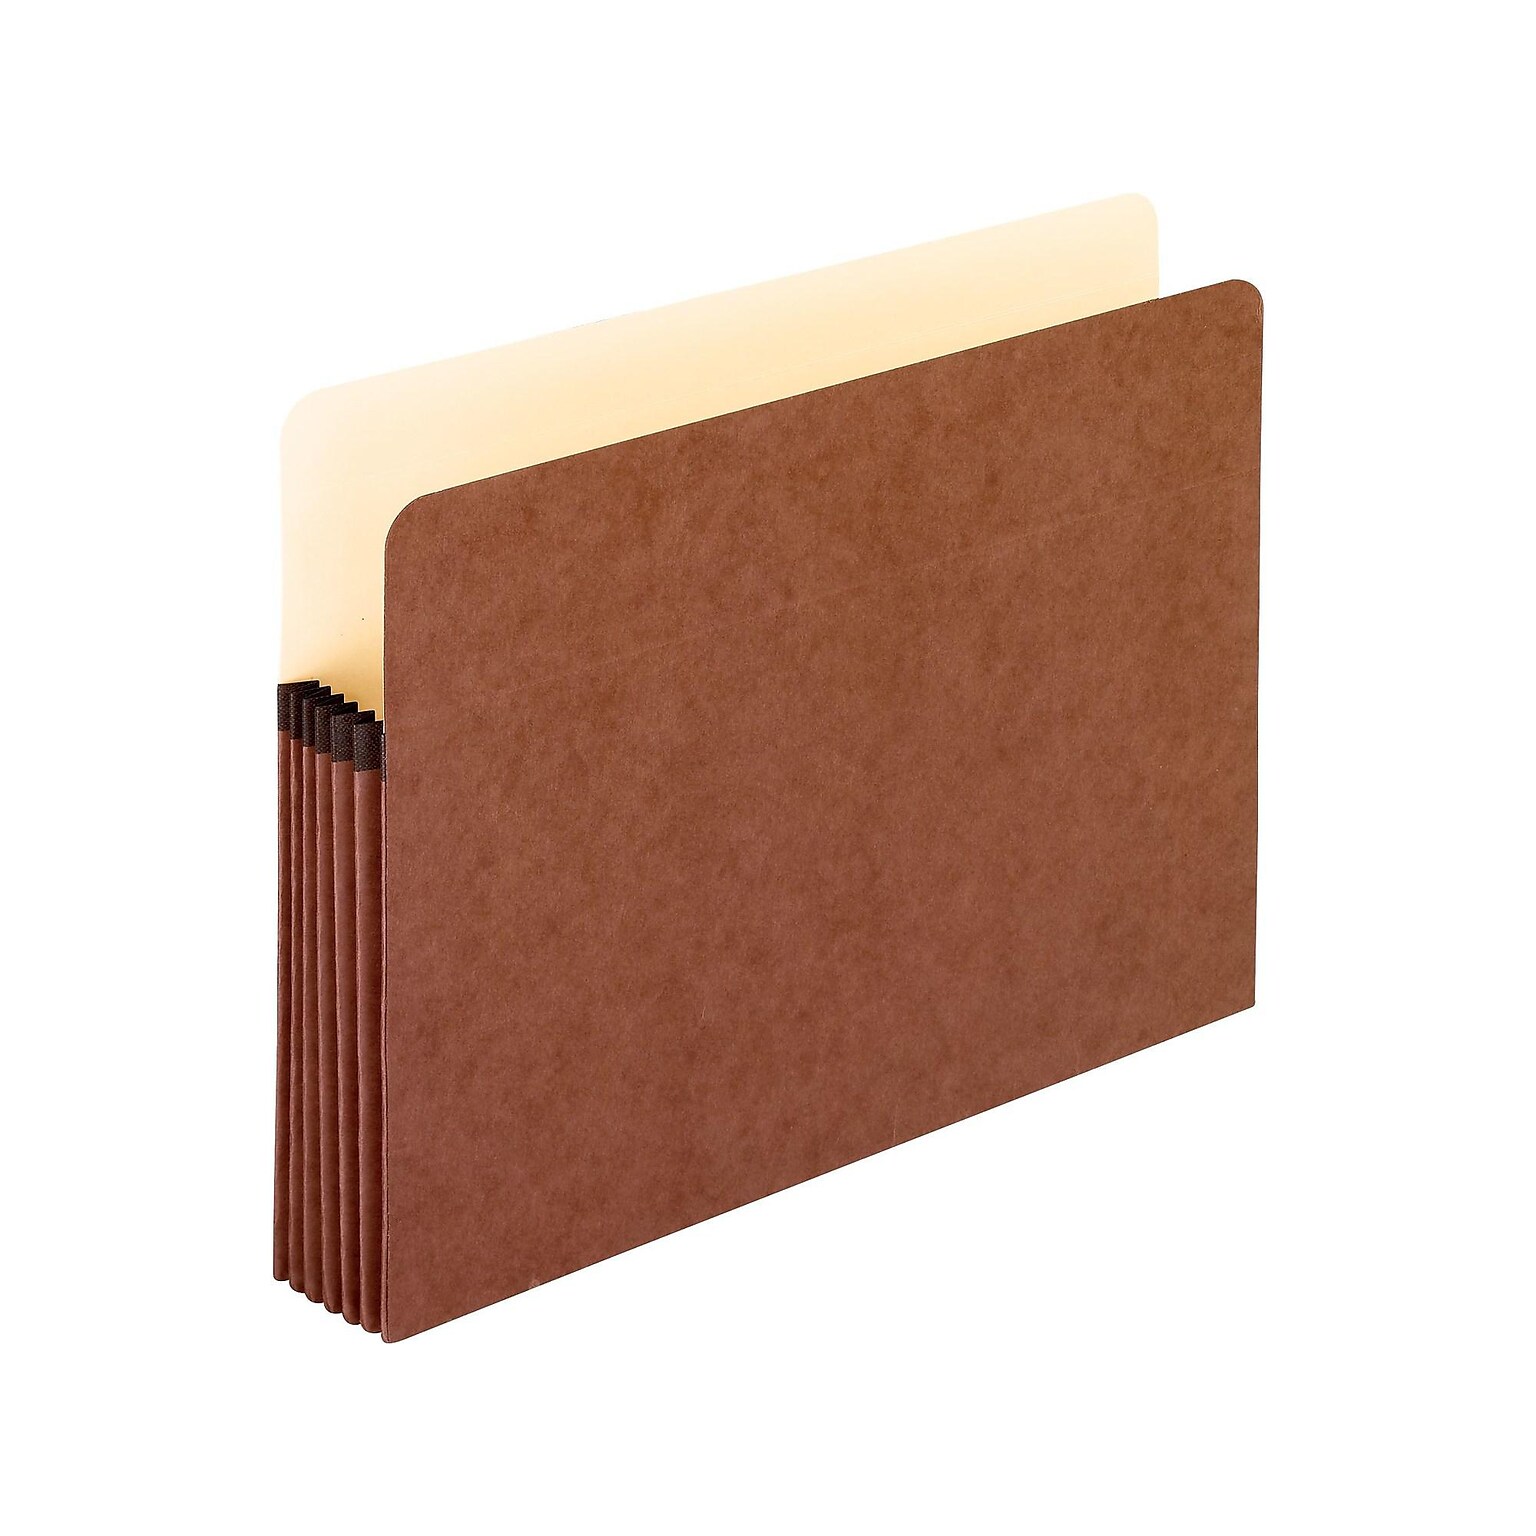 Pendaflex Earthwise Recycled Reinforced File Pocket, 5 1/4 Expansion, Letter Size, Brown, 10/Box (E1534CT)